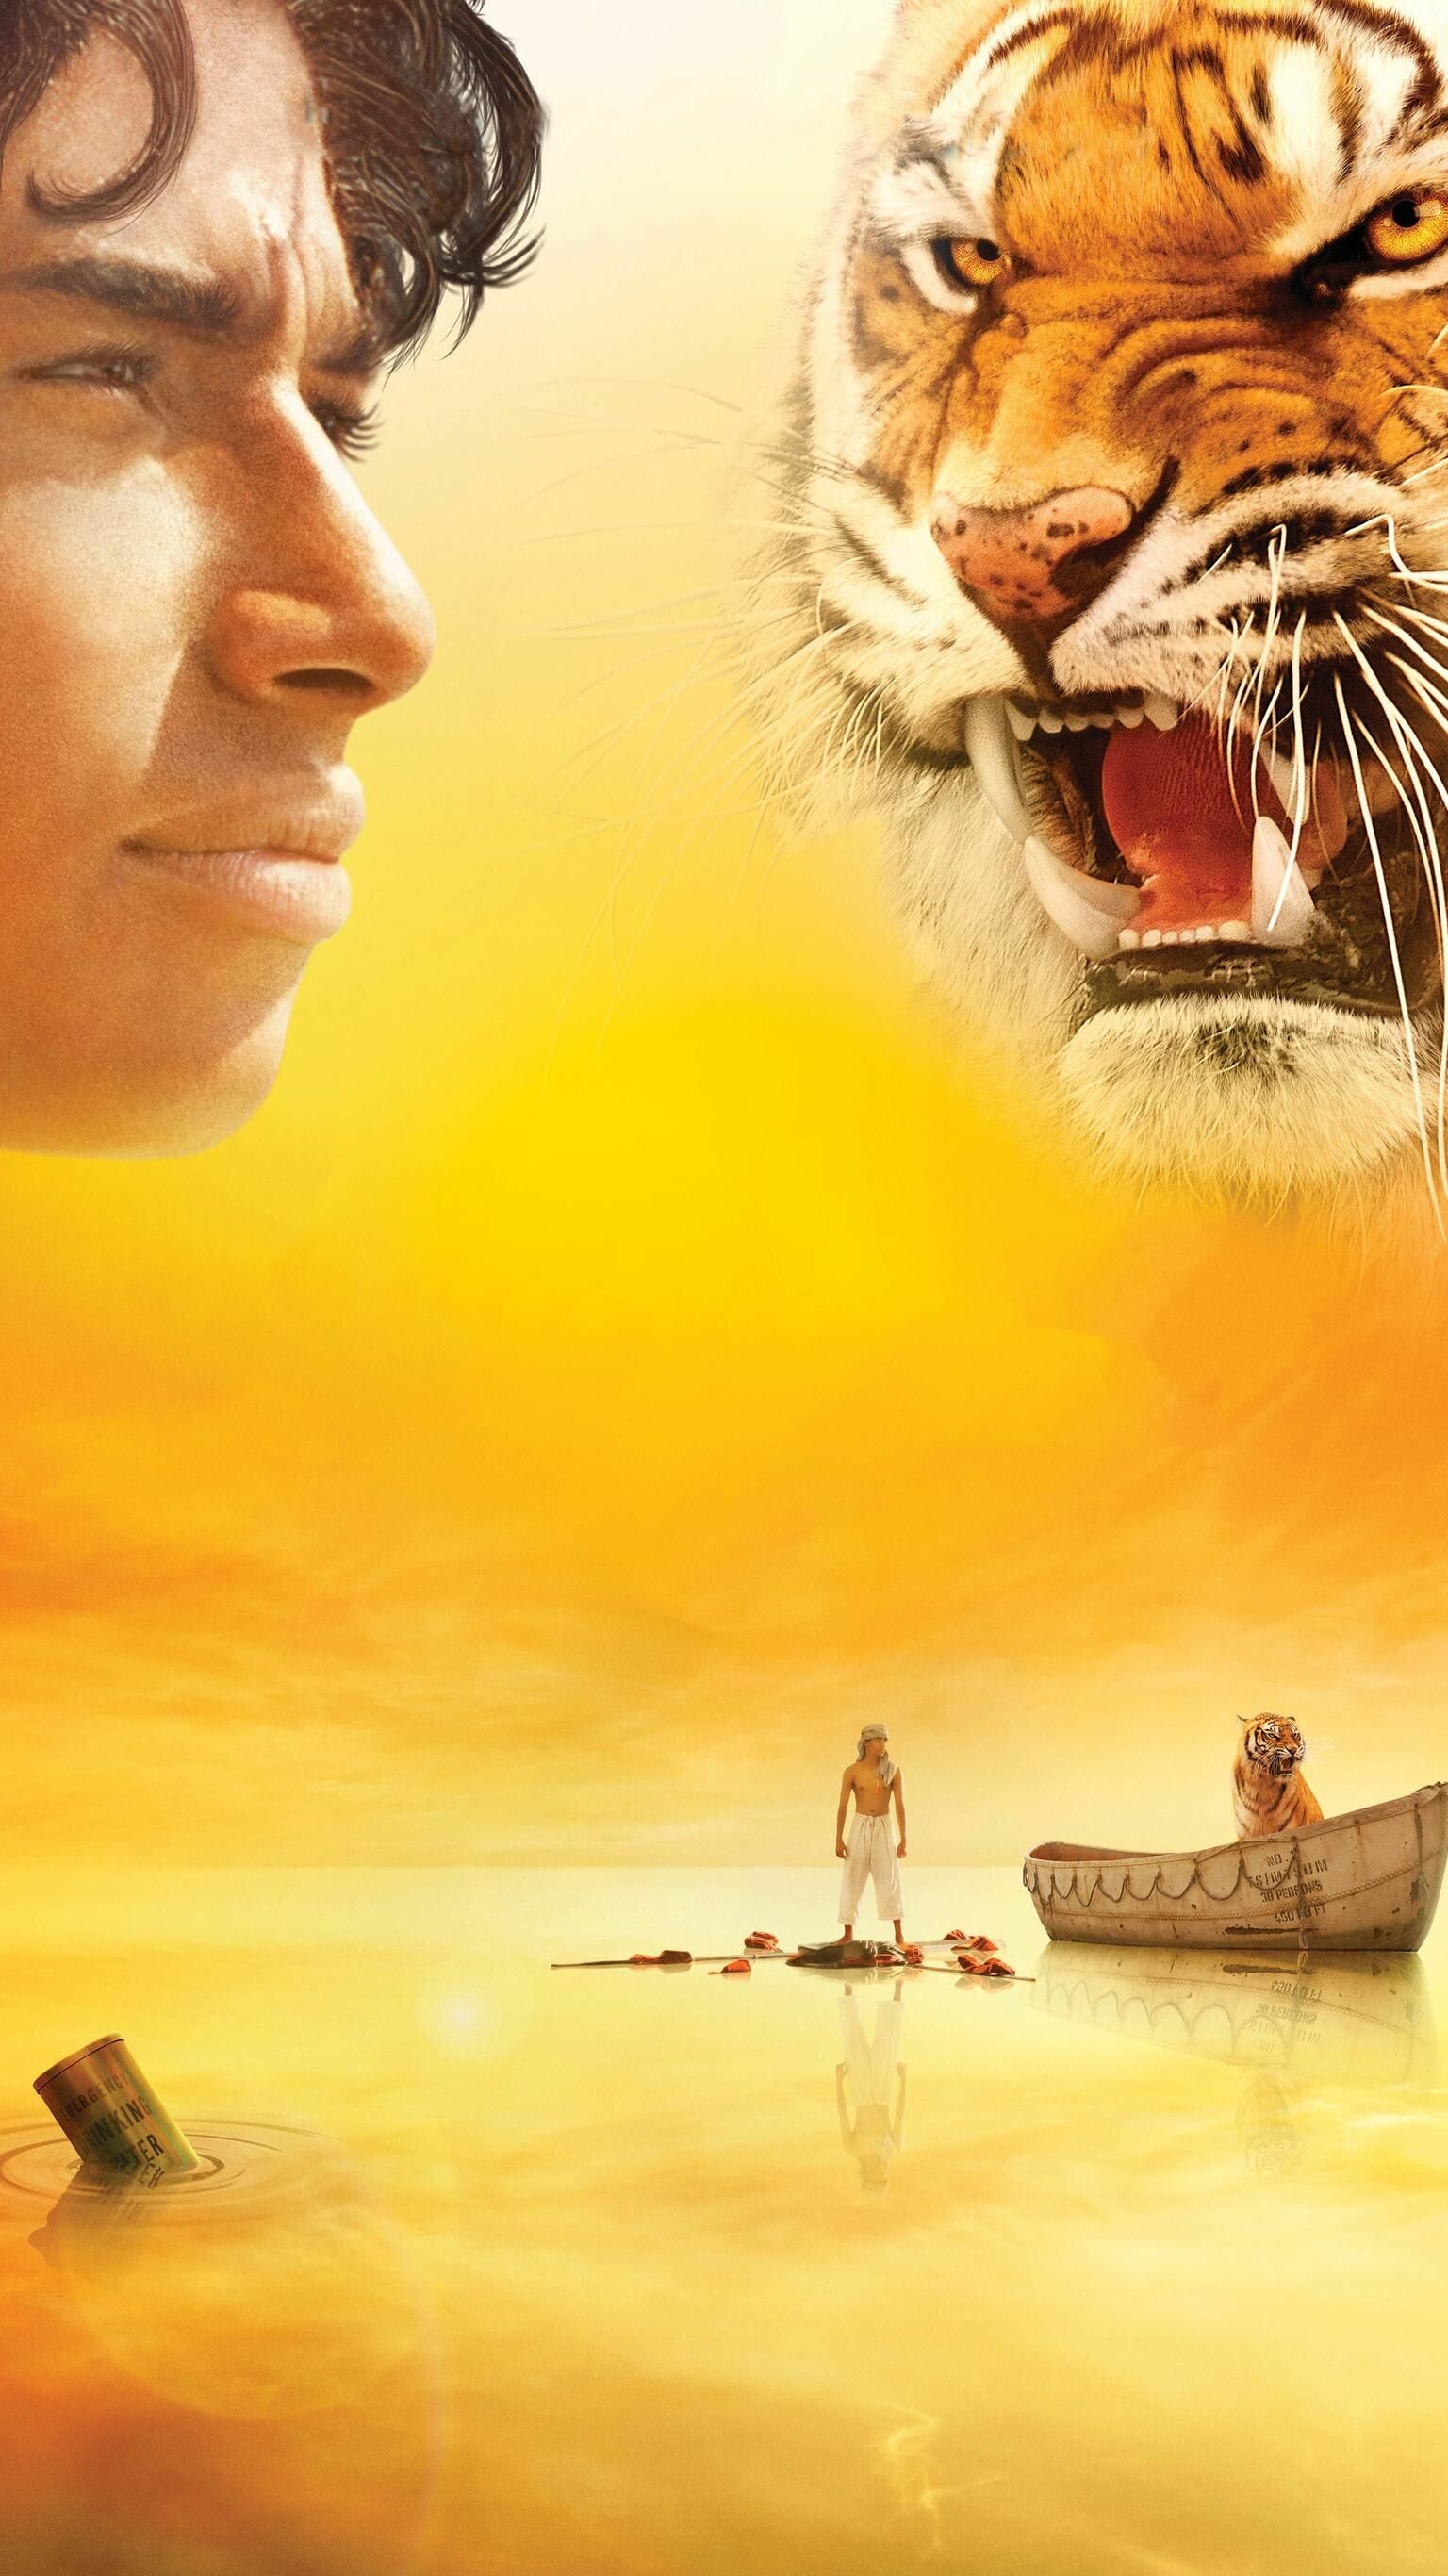 Life of Pi: The film had its worldwide premiere as the opening film of the 50th New York Film Festival at both the Walter Reade Theater and Alice Tully Hall in New York City on September 28, 2012. 1540x2740 HD Background.